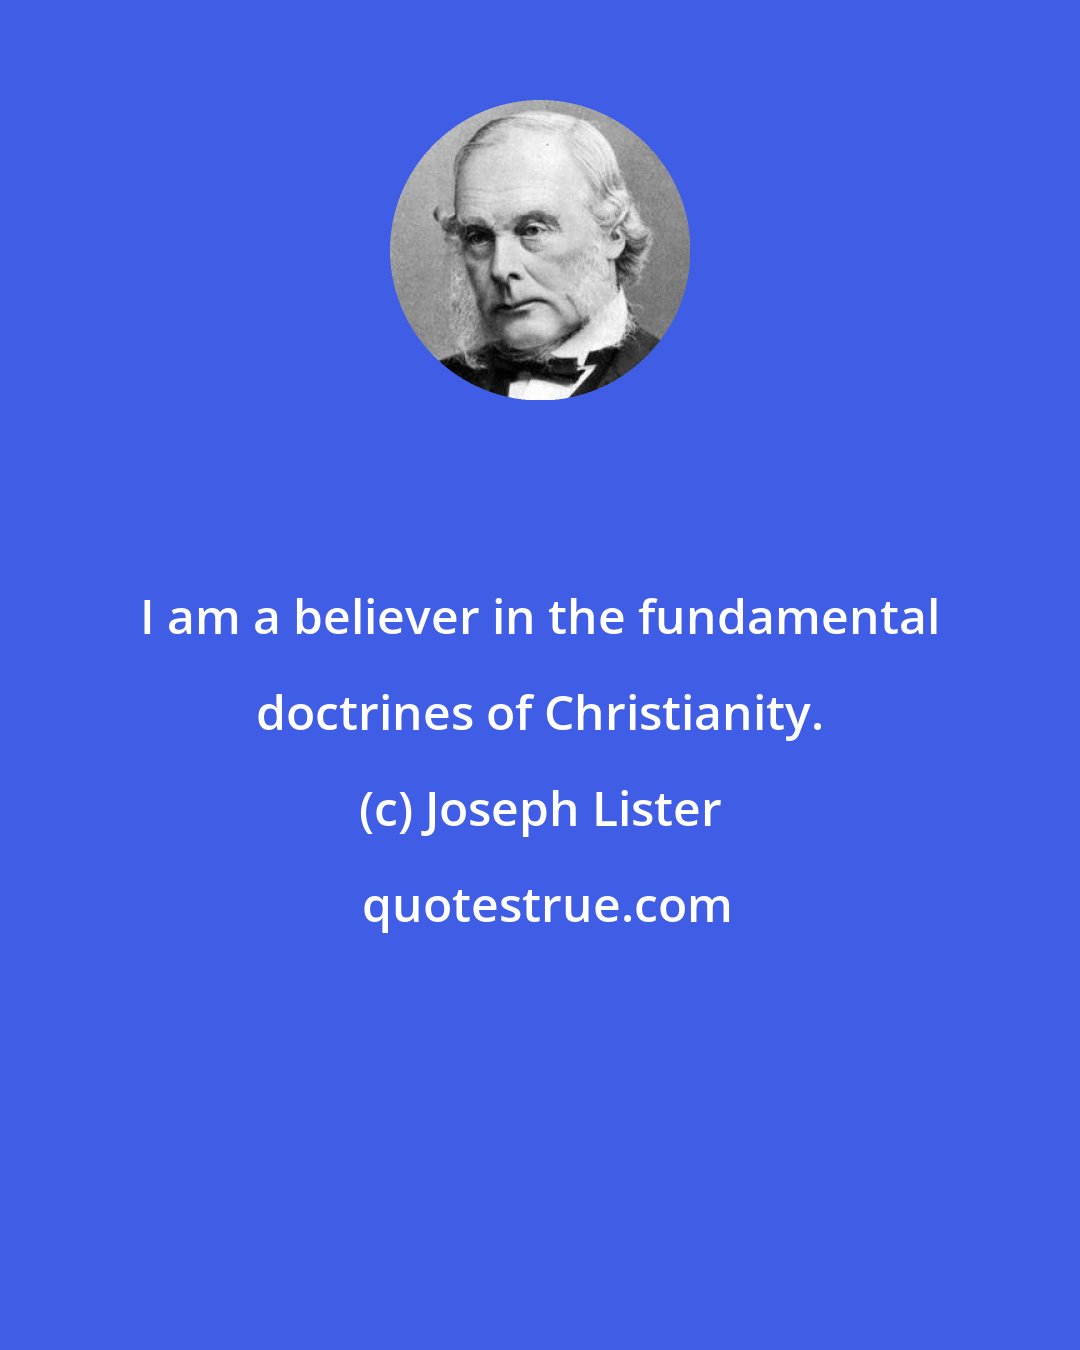 Joseph Lister: I am a believer in the fundamental doctrines of Christianity.